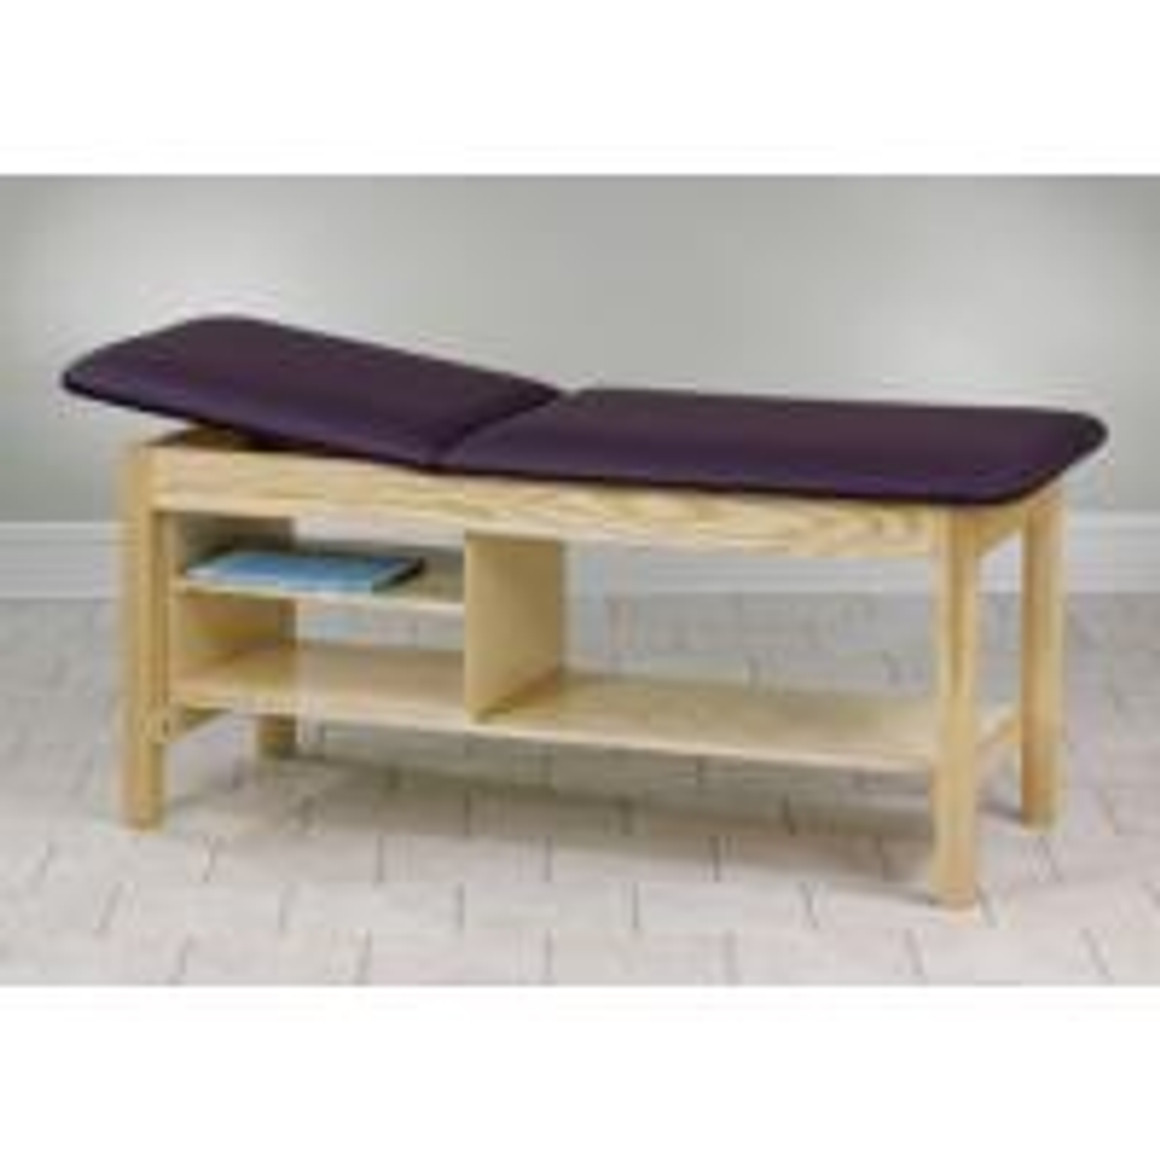 Clinton Classic Series Straight Line Treatment Table with Shelving Unit, 30" Wide, Slate Blue